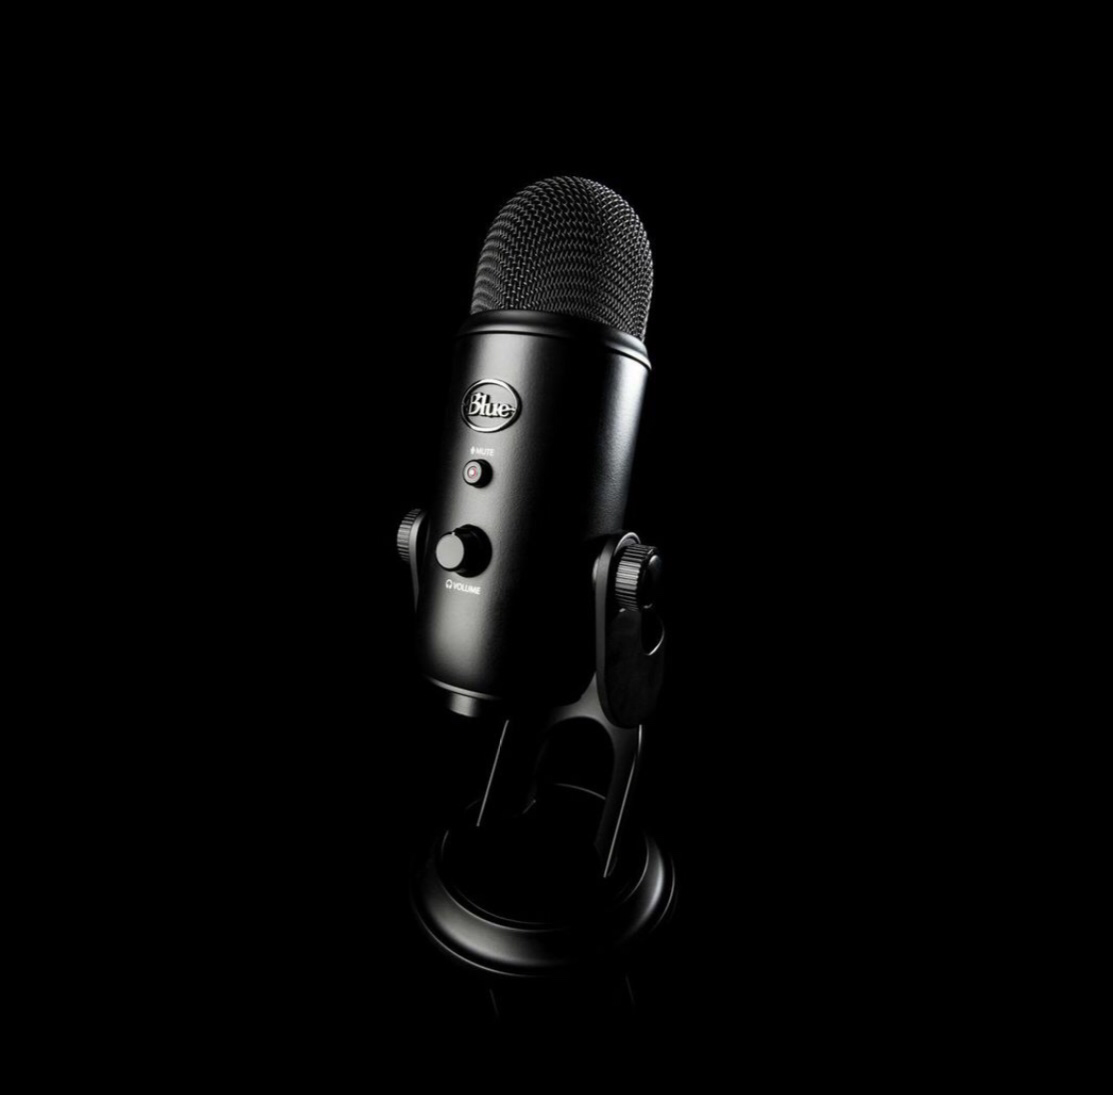 This Blackout Yeti Microphone from Blue Is Gorgeous